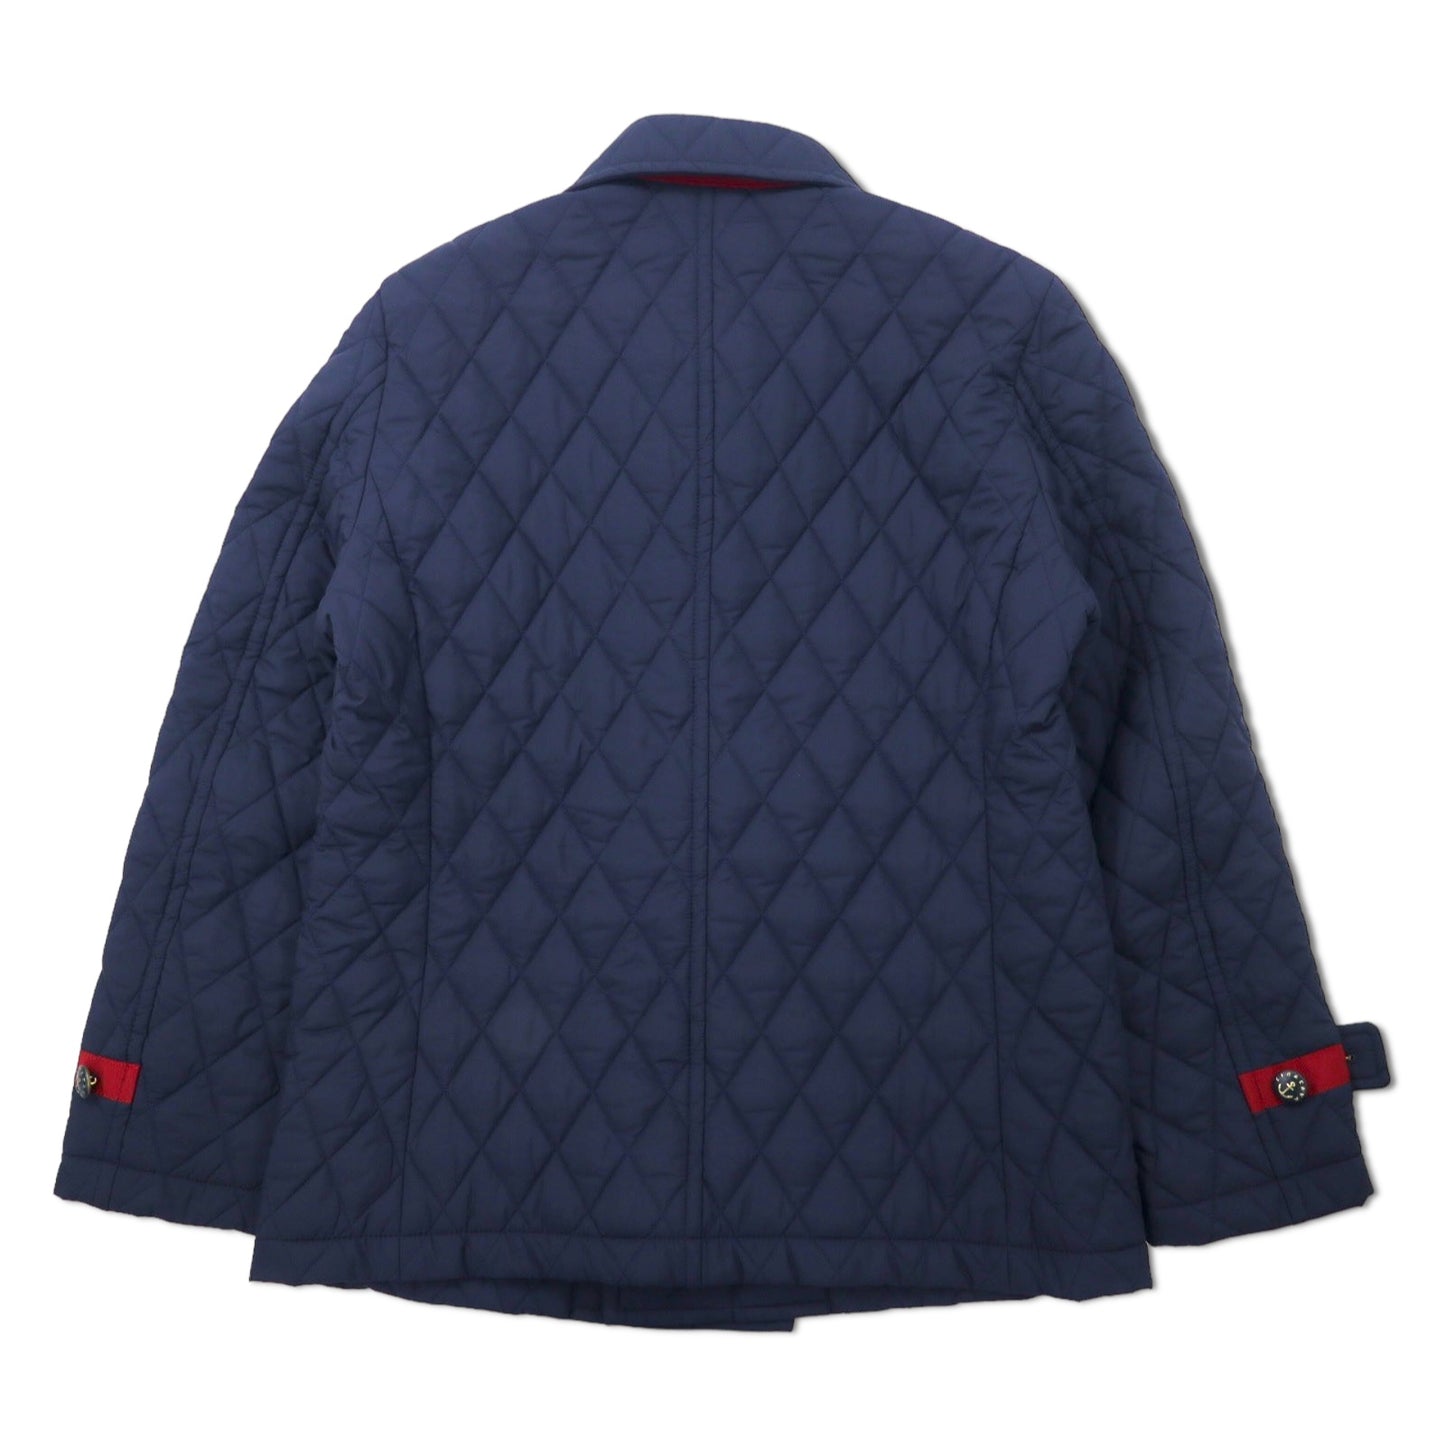 SINA COVA Double Brest Quilted Jacket P COAT Cotton L Navy 